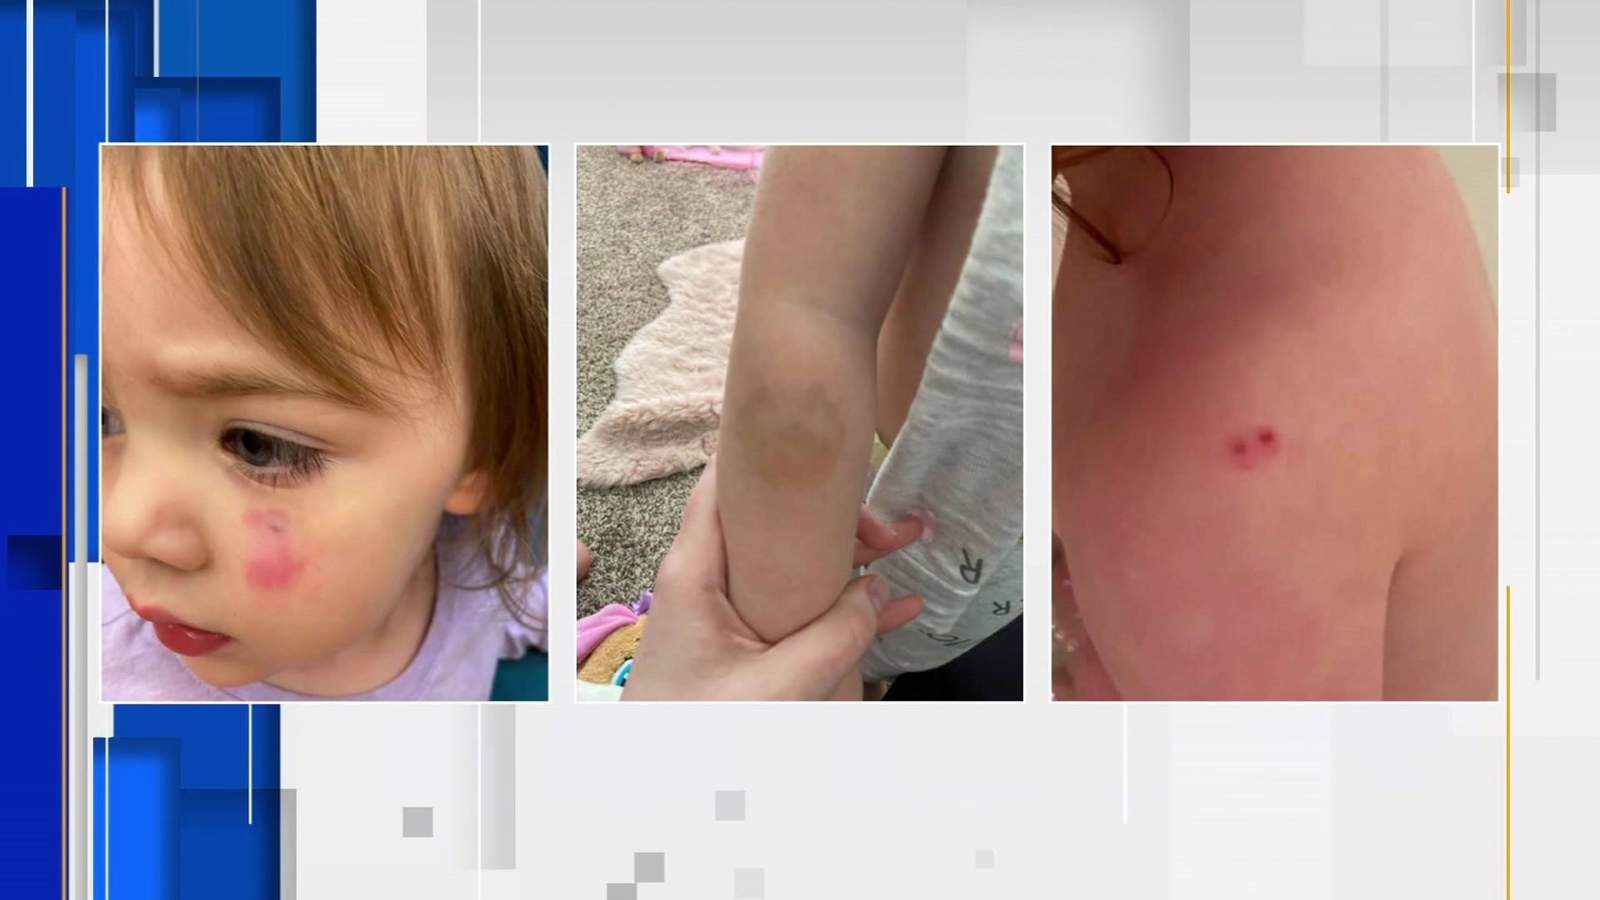 Mother upset with how daycare handled her daughter’s injuries